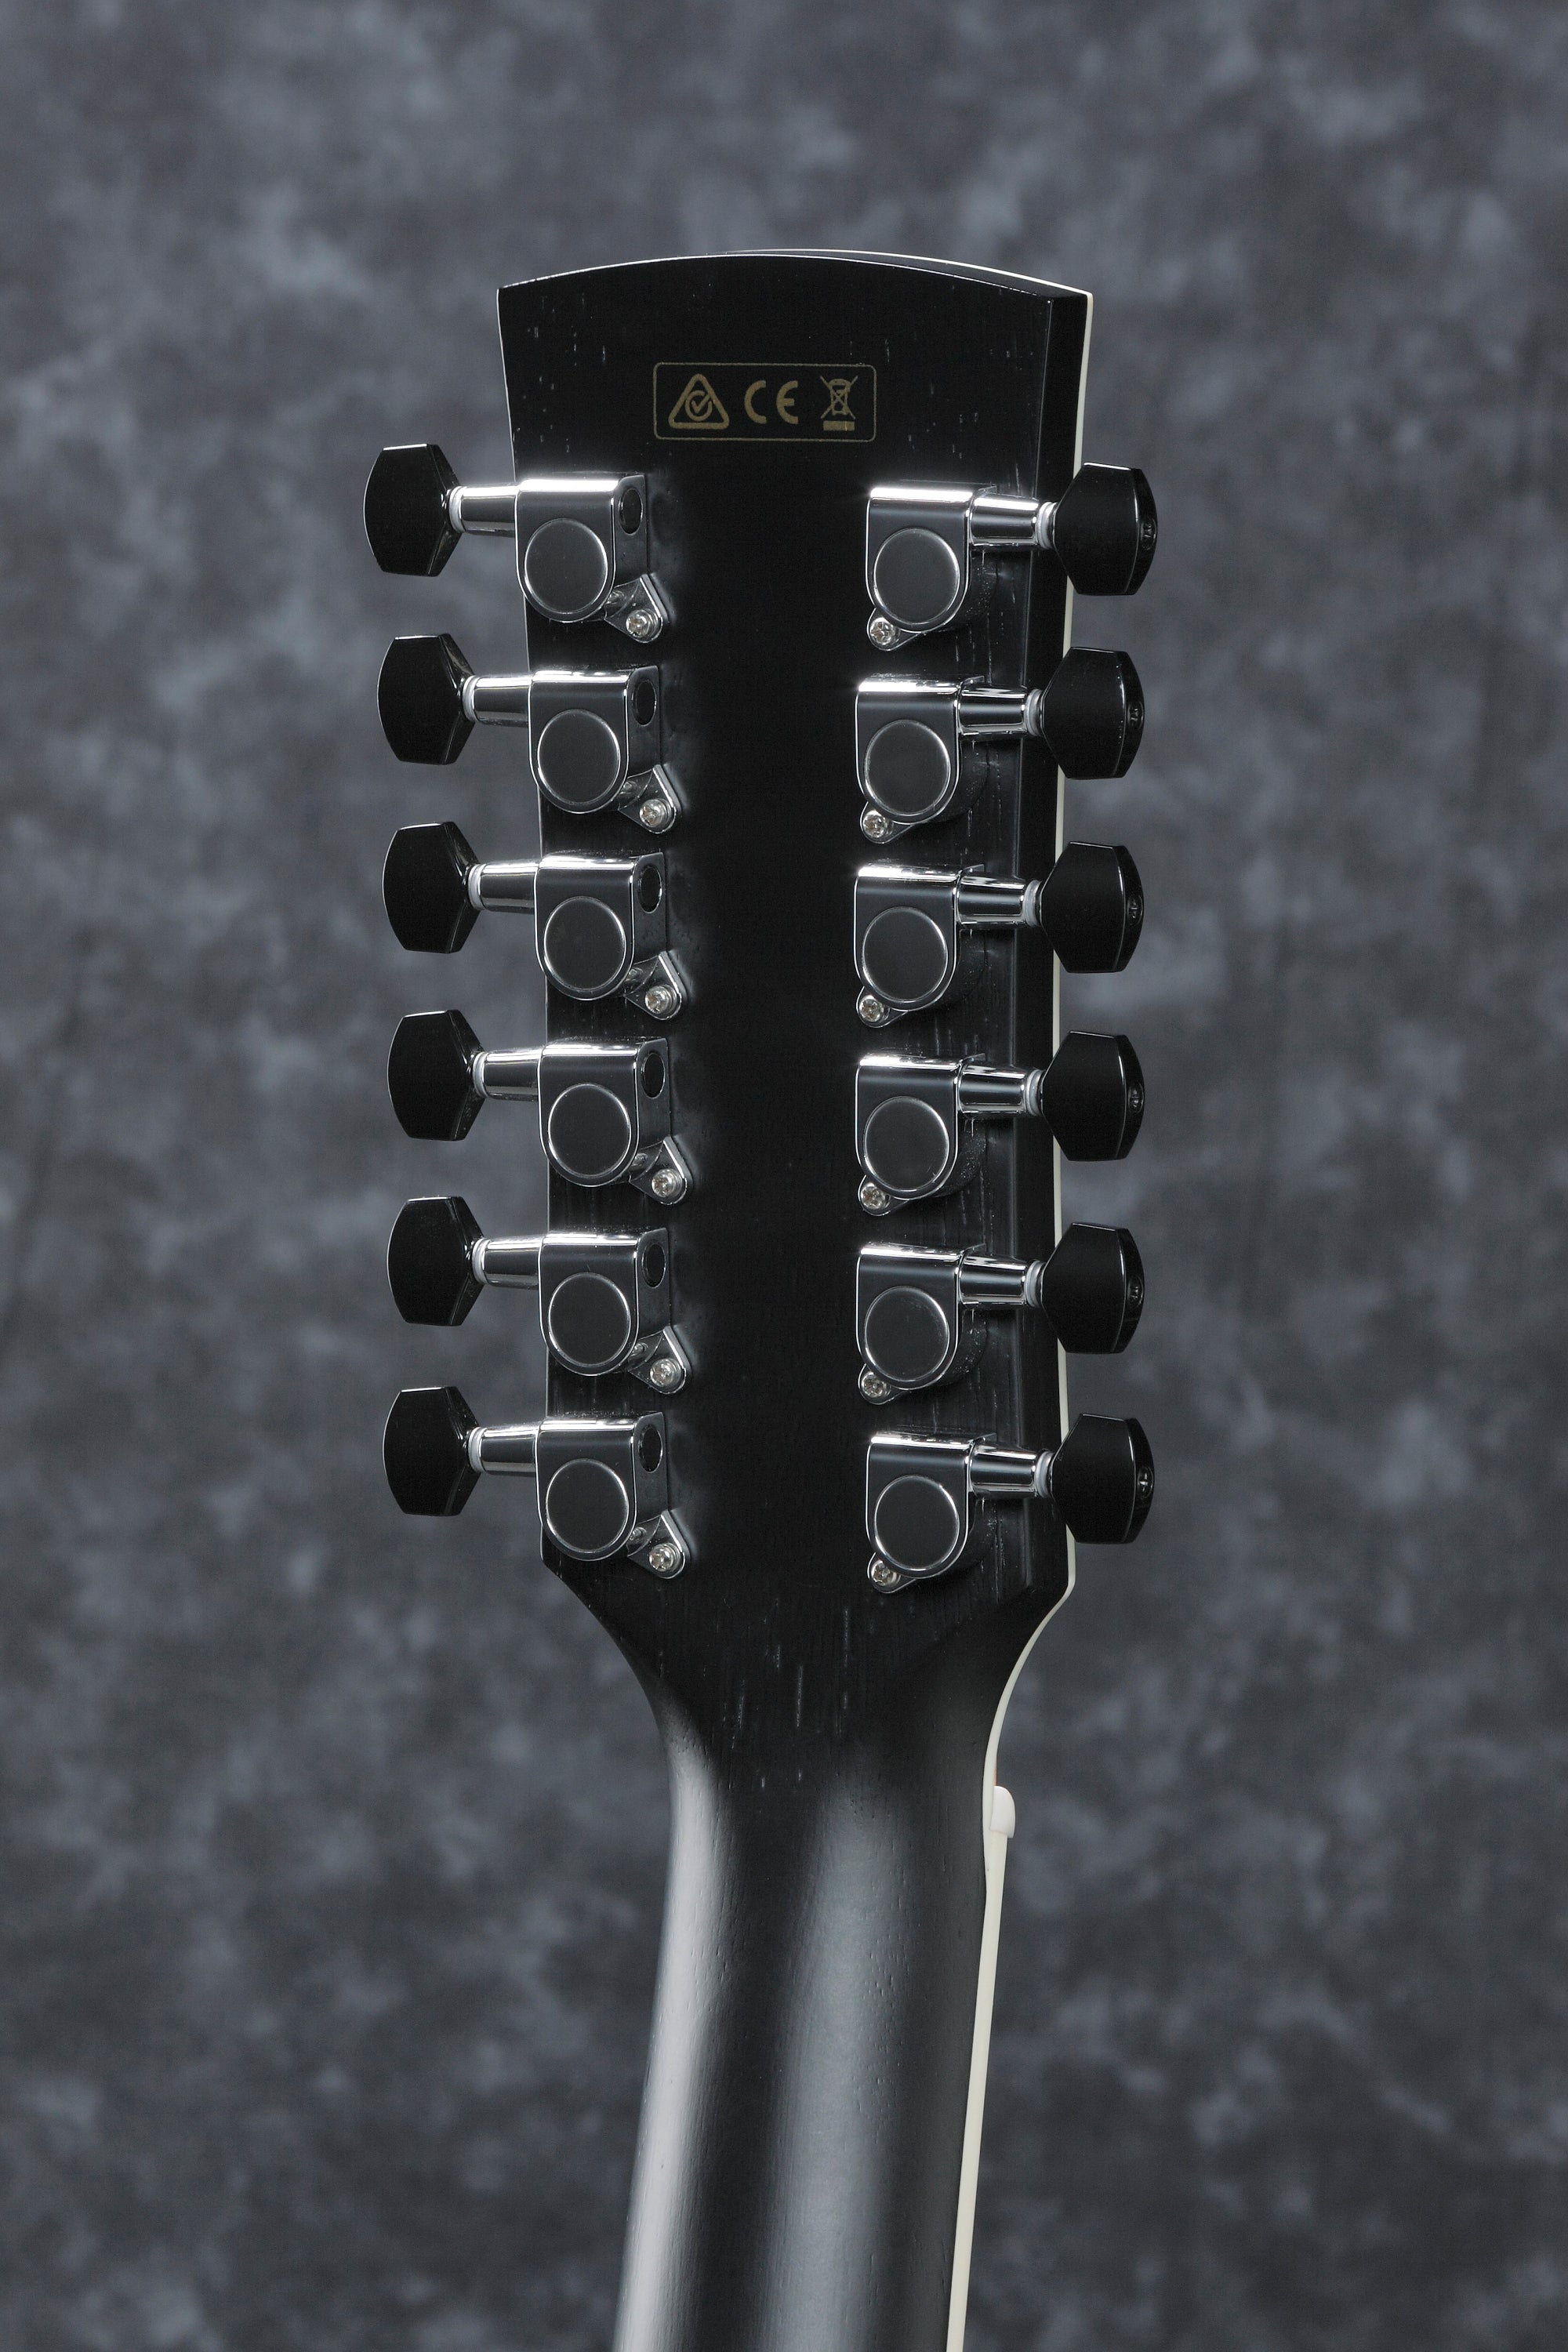 Ibanez AW8412CE Acoustic Guitar (Weathered Black Open Pore)